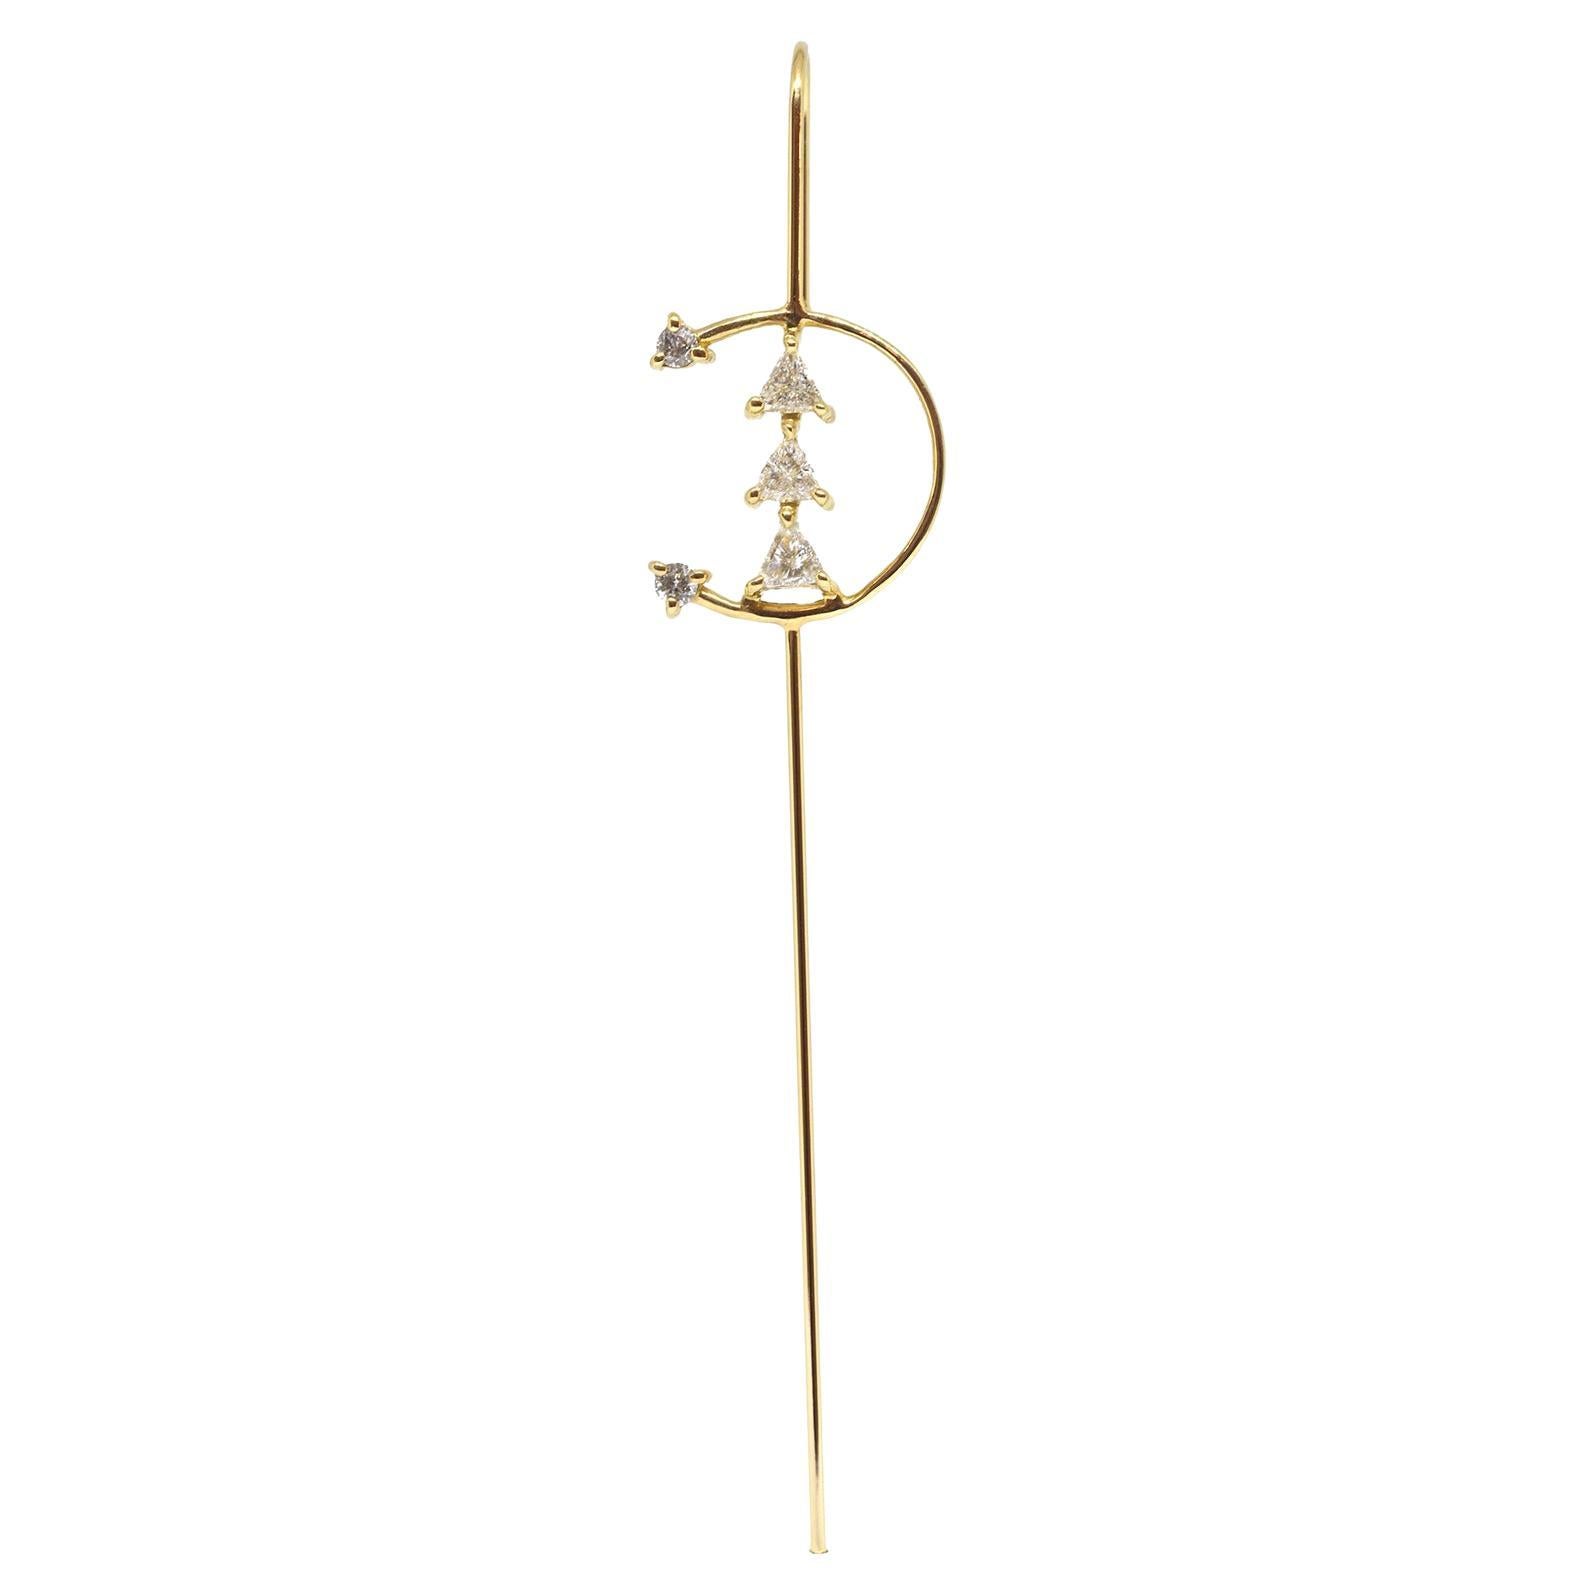 The Sunrise Needle Earring is constructed of a delicate gold needle like rod featuring trillion and round shape diamonds . Available with other precious stones of your choice. 

How to wear it: 

Thread the needle end through the ear lobe piercing